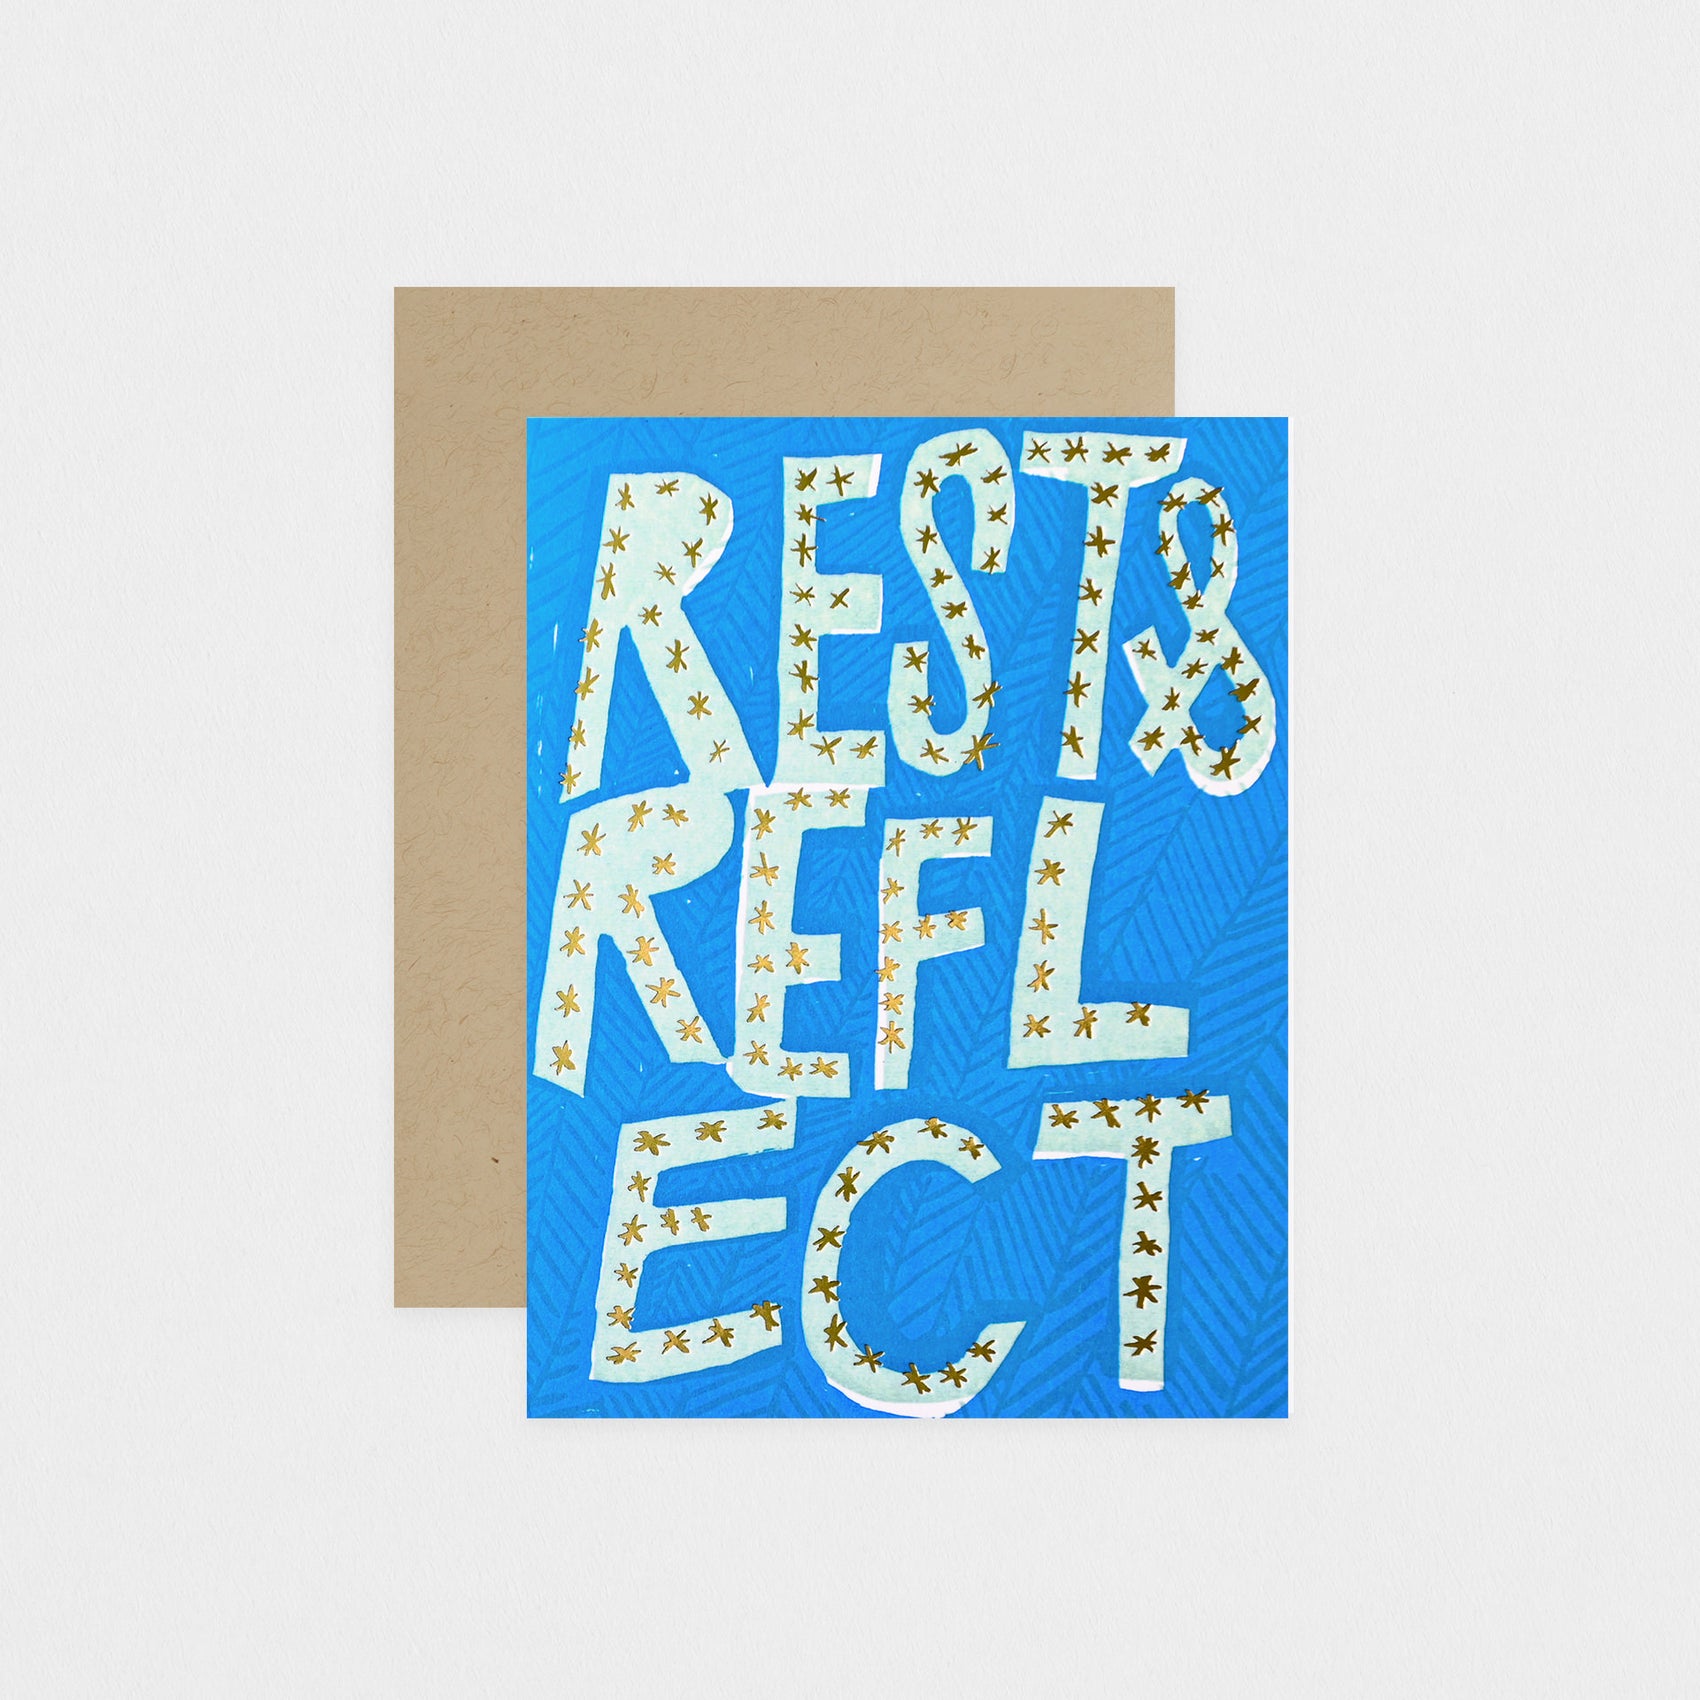 Egg Press Rest & Reflect Holiday Card 